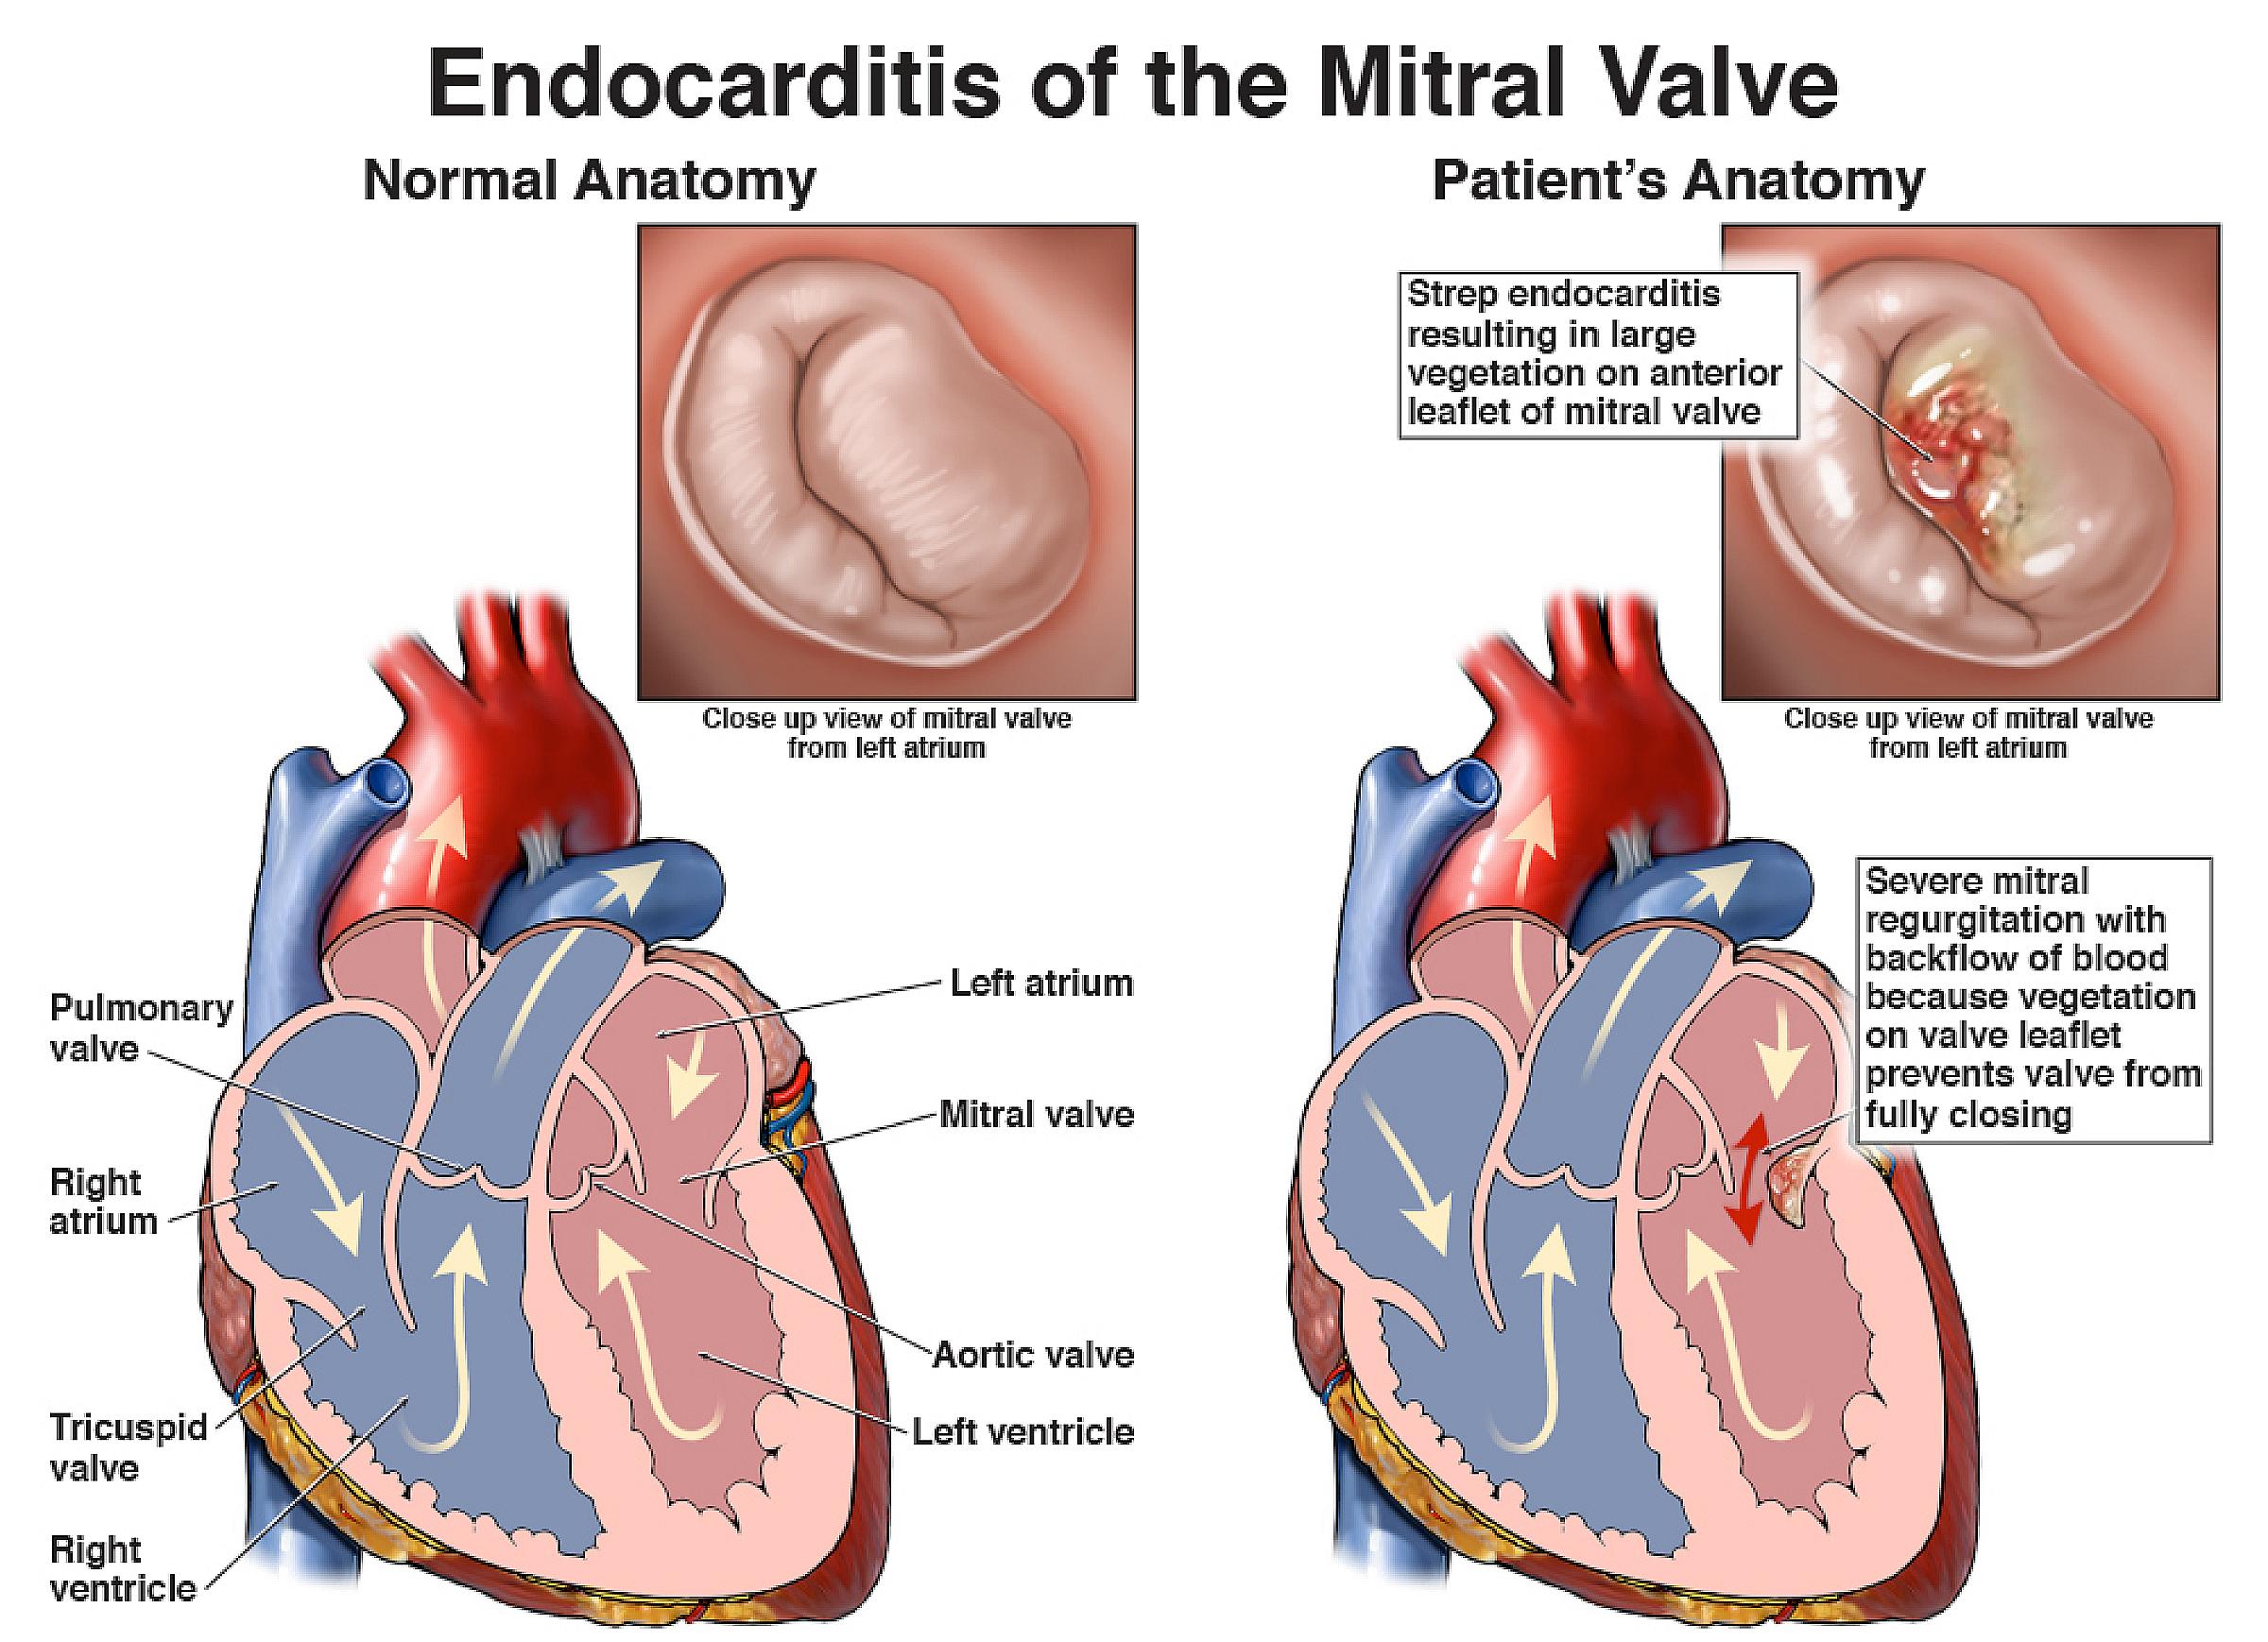 Image of endocarditis of the mitral valve